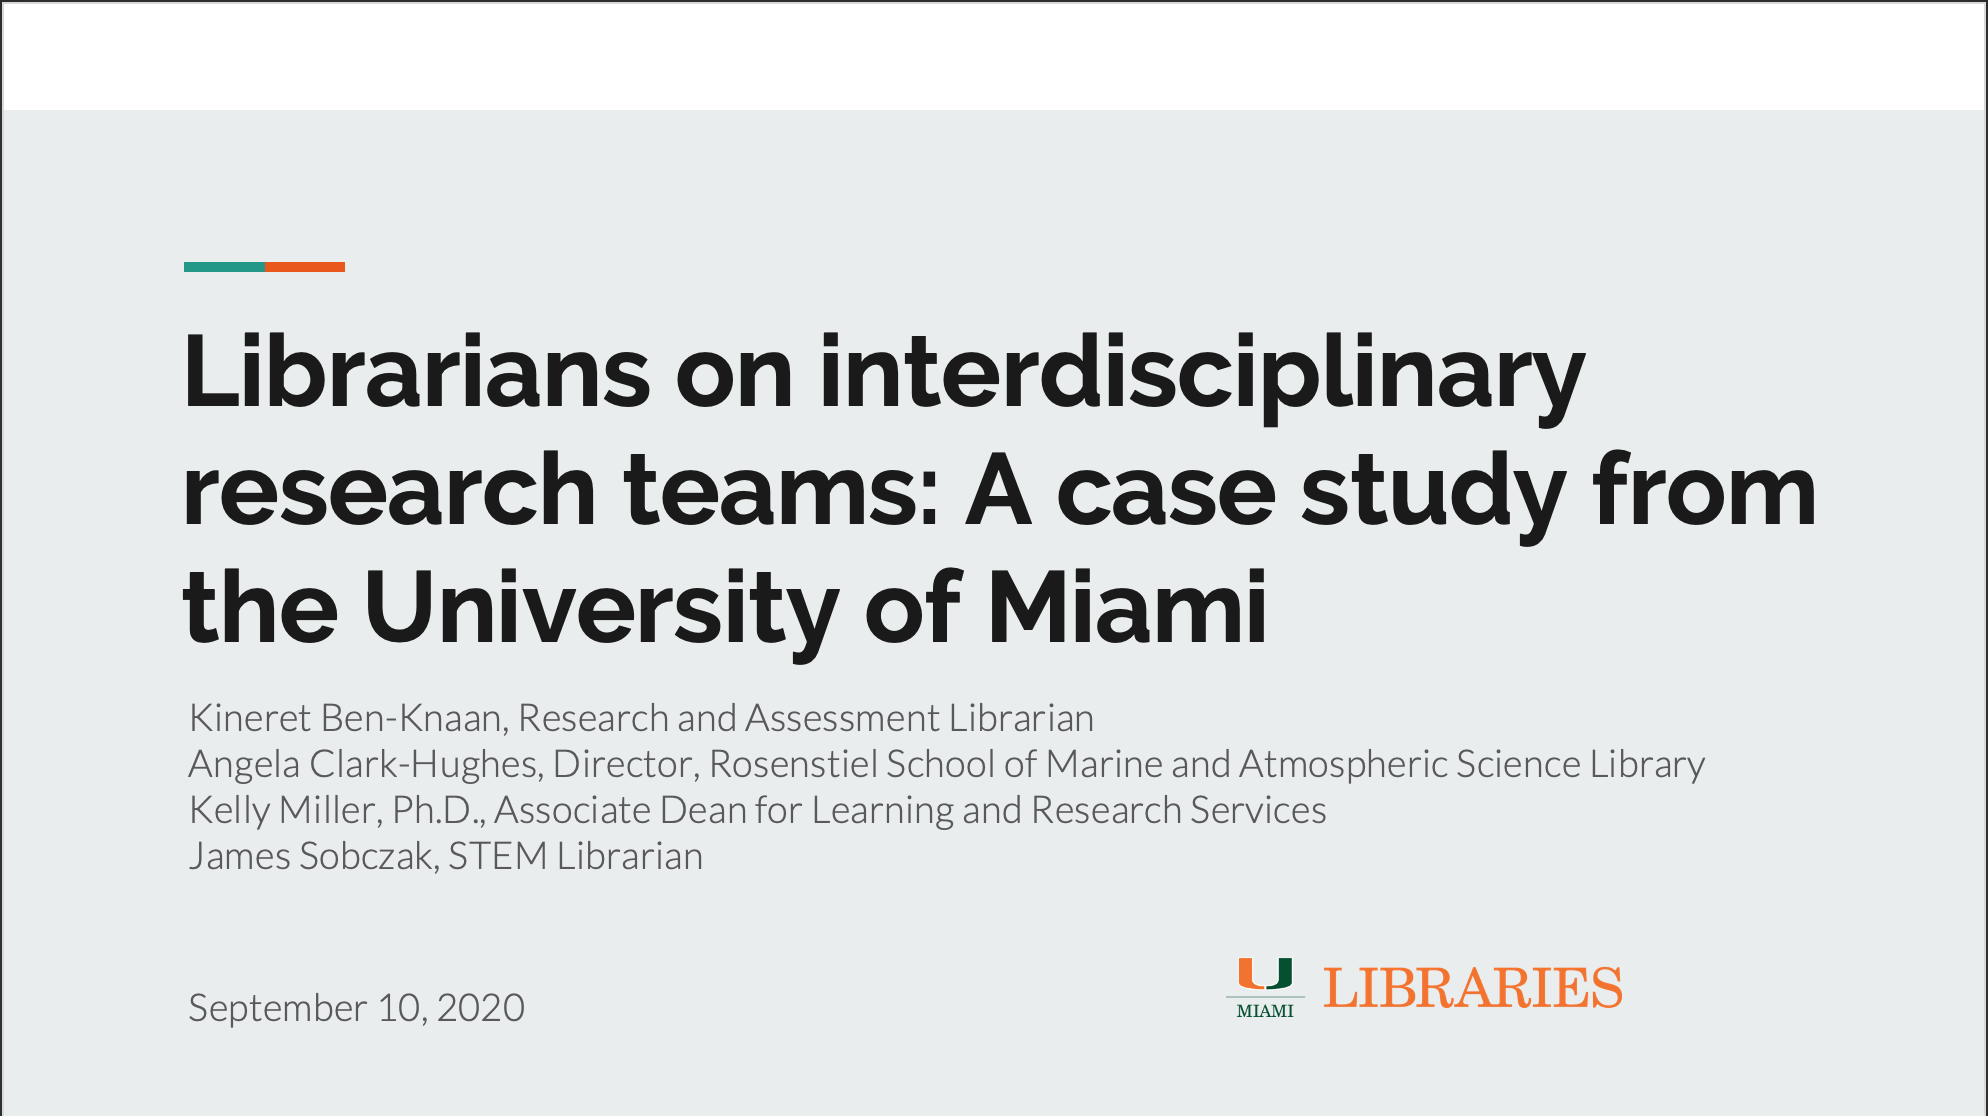 Librarians on interdisciplinary research teams—a case study from the University of Miami